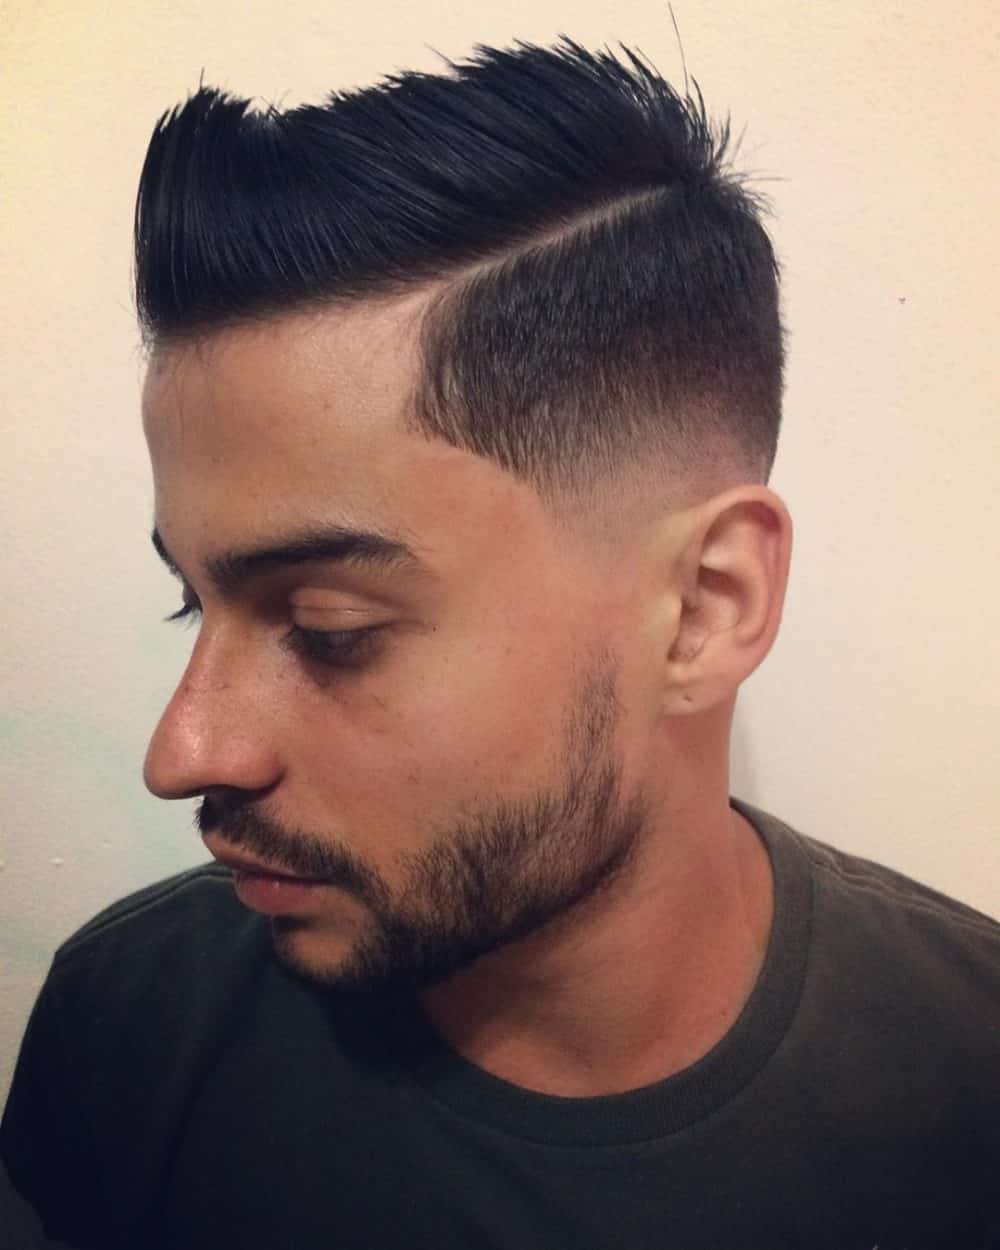 Low taper fade. Low Taper Fade Haircut. Taper Fade стрижка мужская. Low Taper Hairstyles. The Taper Hairstyle for men.